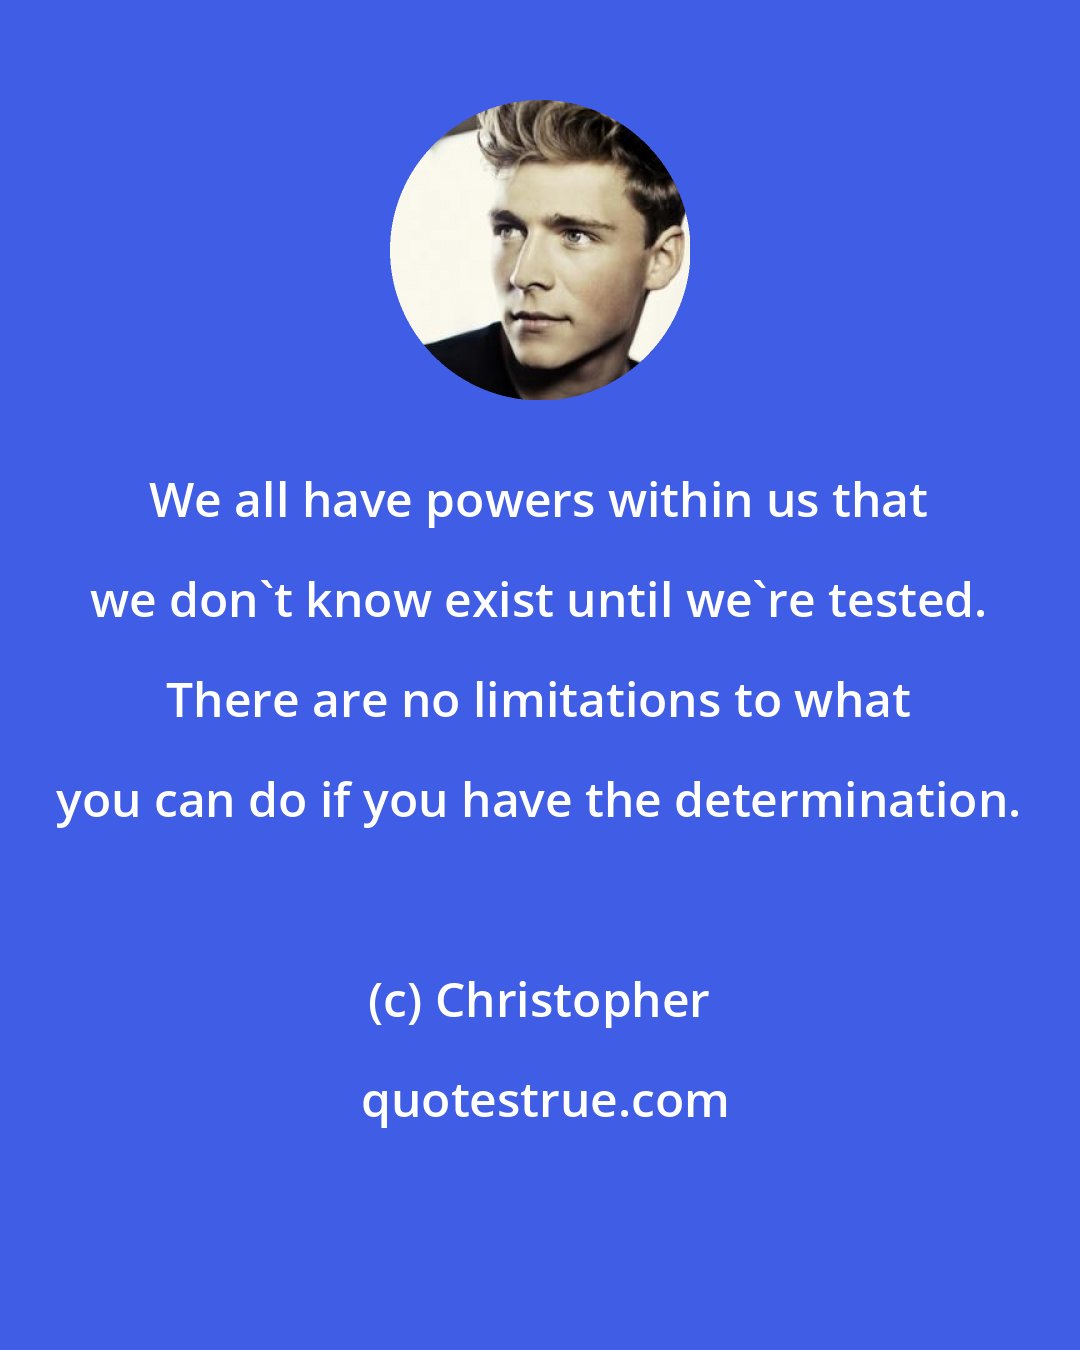 Christopher: We all have powers within us that we don't know exist until we're tested. There are no limitations to what you can do if you have the determination.